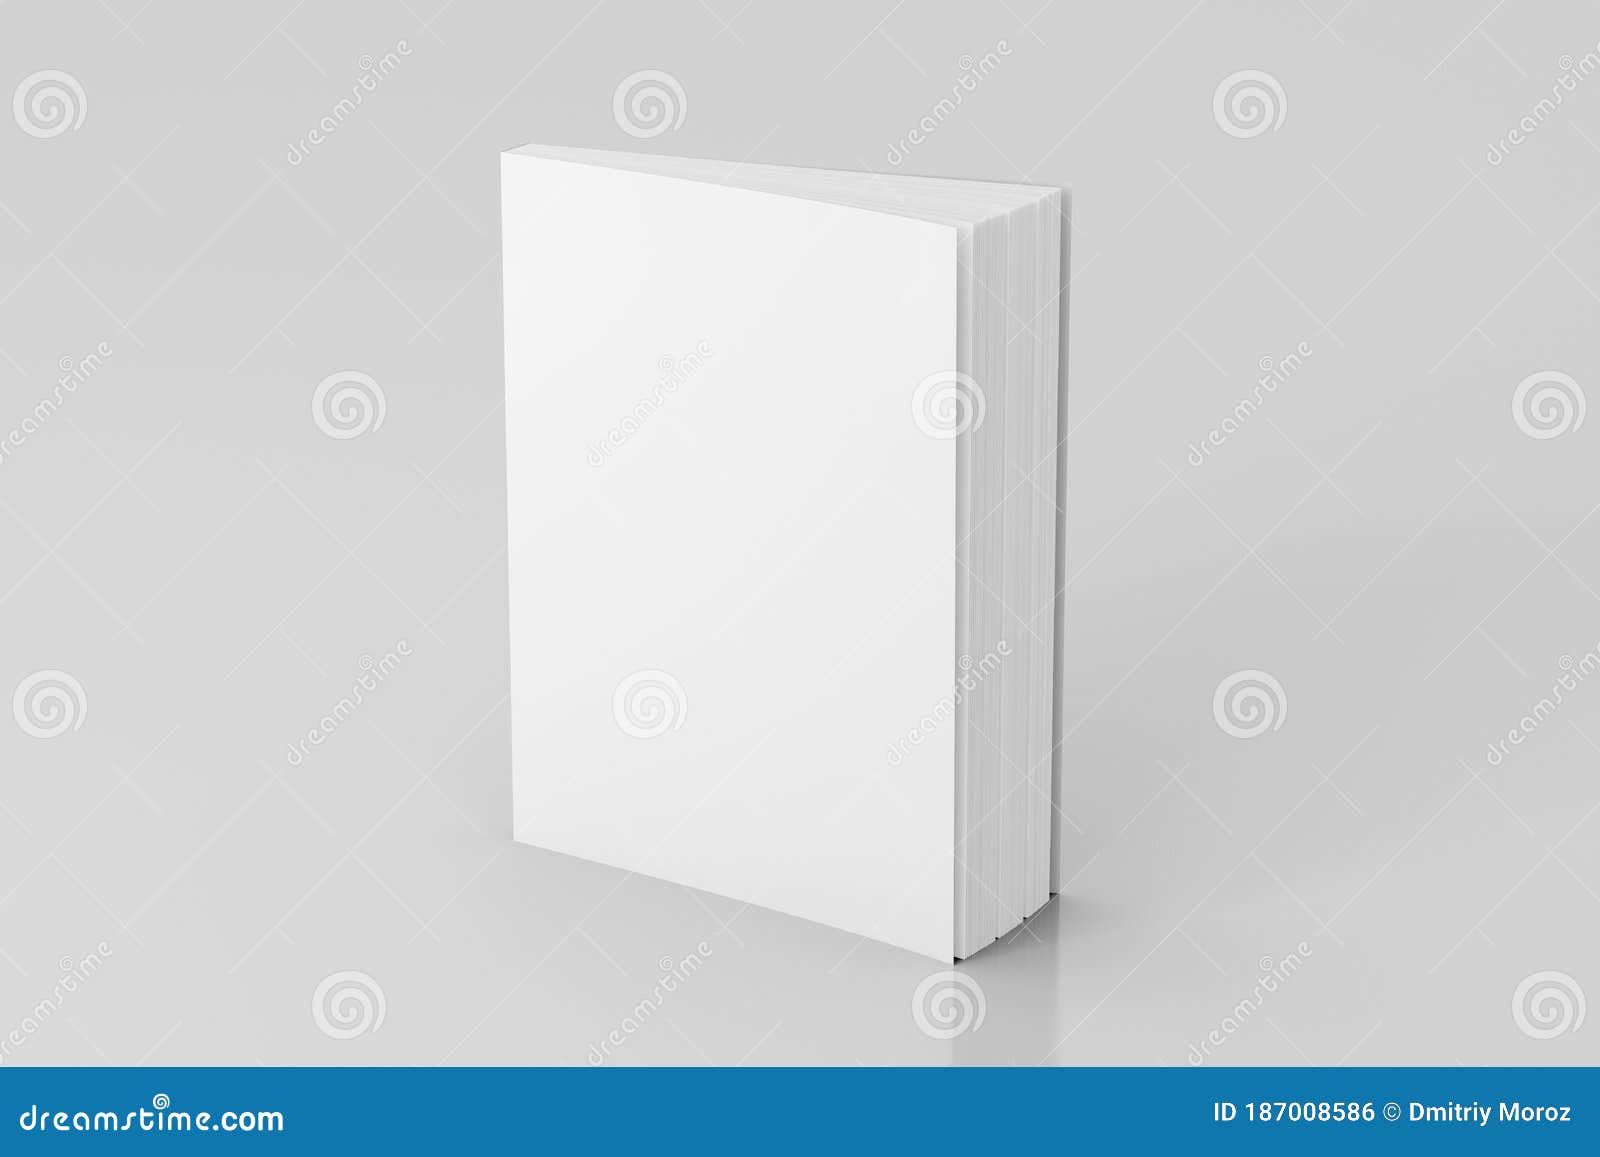 blank soft color book standing